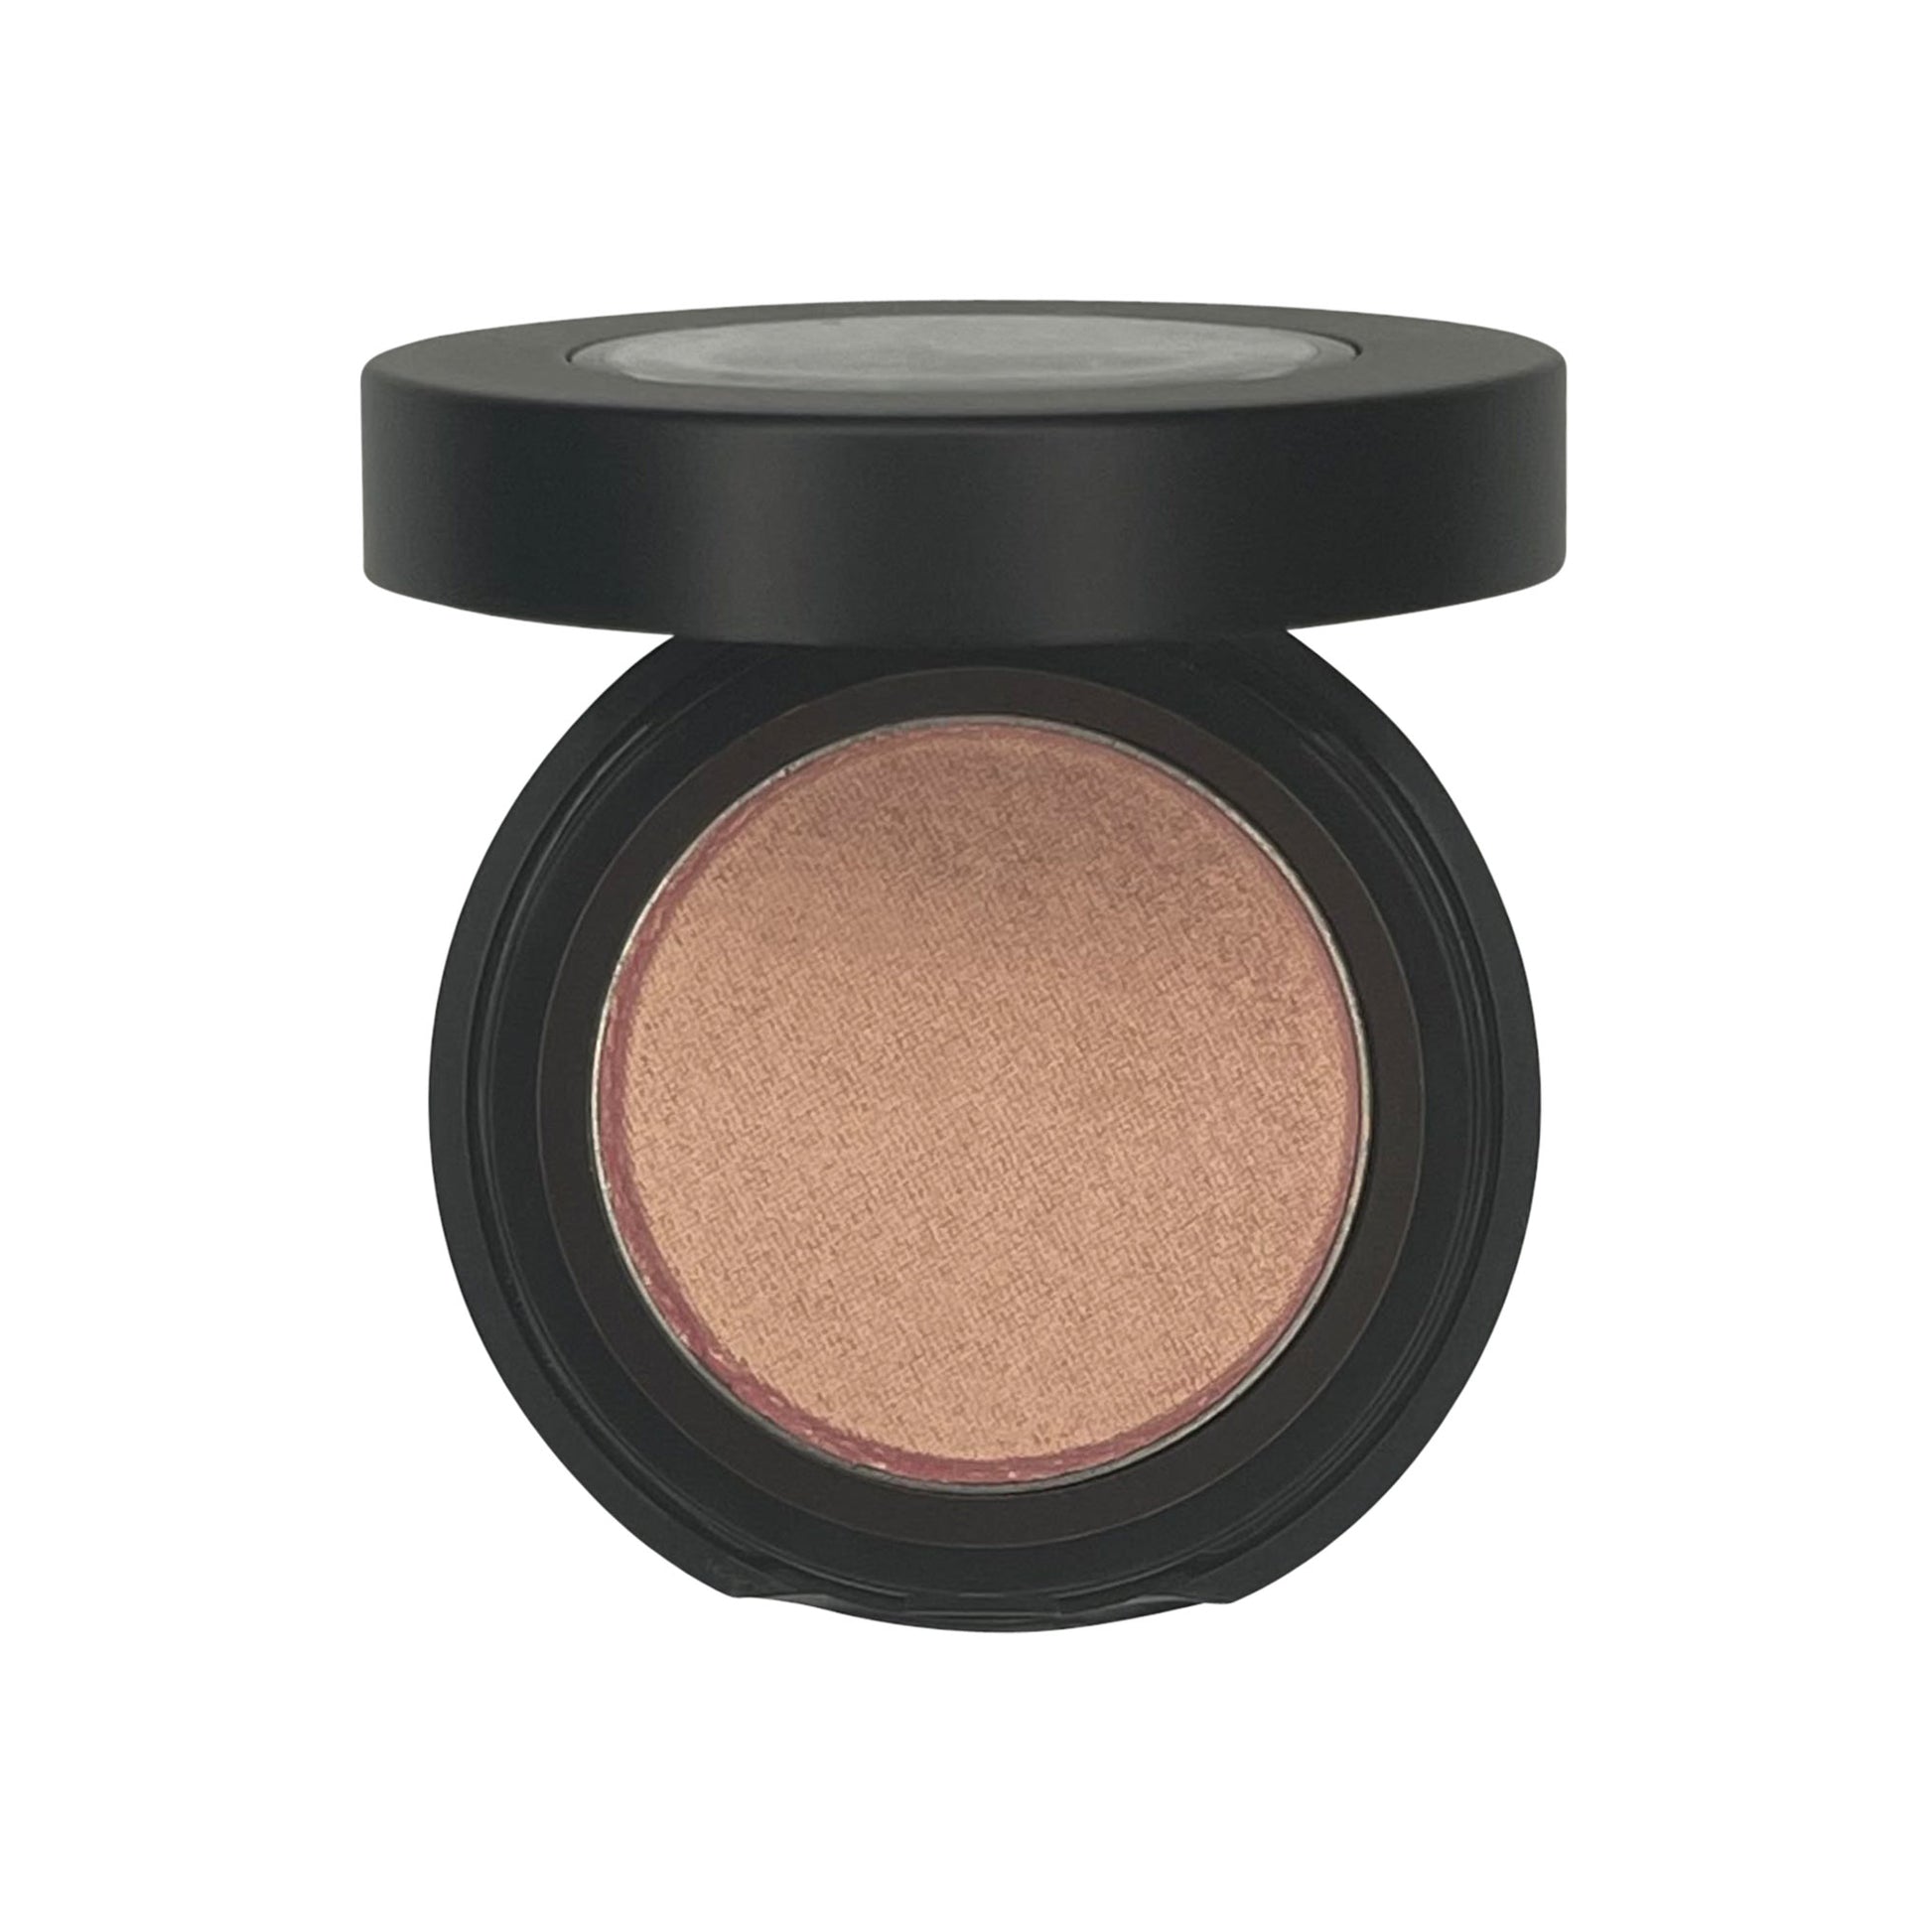 Unleash your inner risk-taker with our Peachy Single Pan Eyeshadow! Made with talc-free Cruisin Organics, this triple-milled eyeshadow is perfect for creating your boldest looks. Mix and match shades for endless possibilities, and pair with your favorite primer for long-lasting, intense color. Take your makeup game to the next level with Peachy!